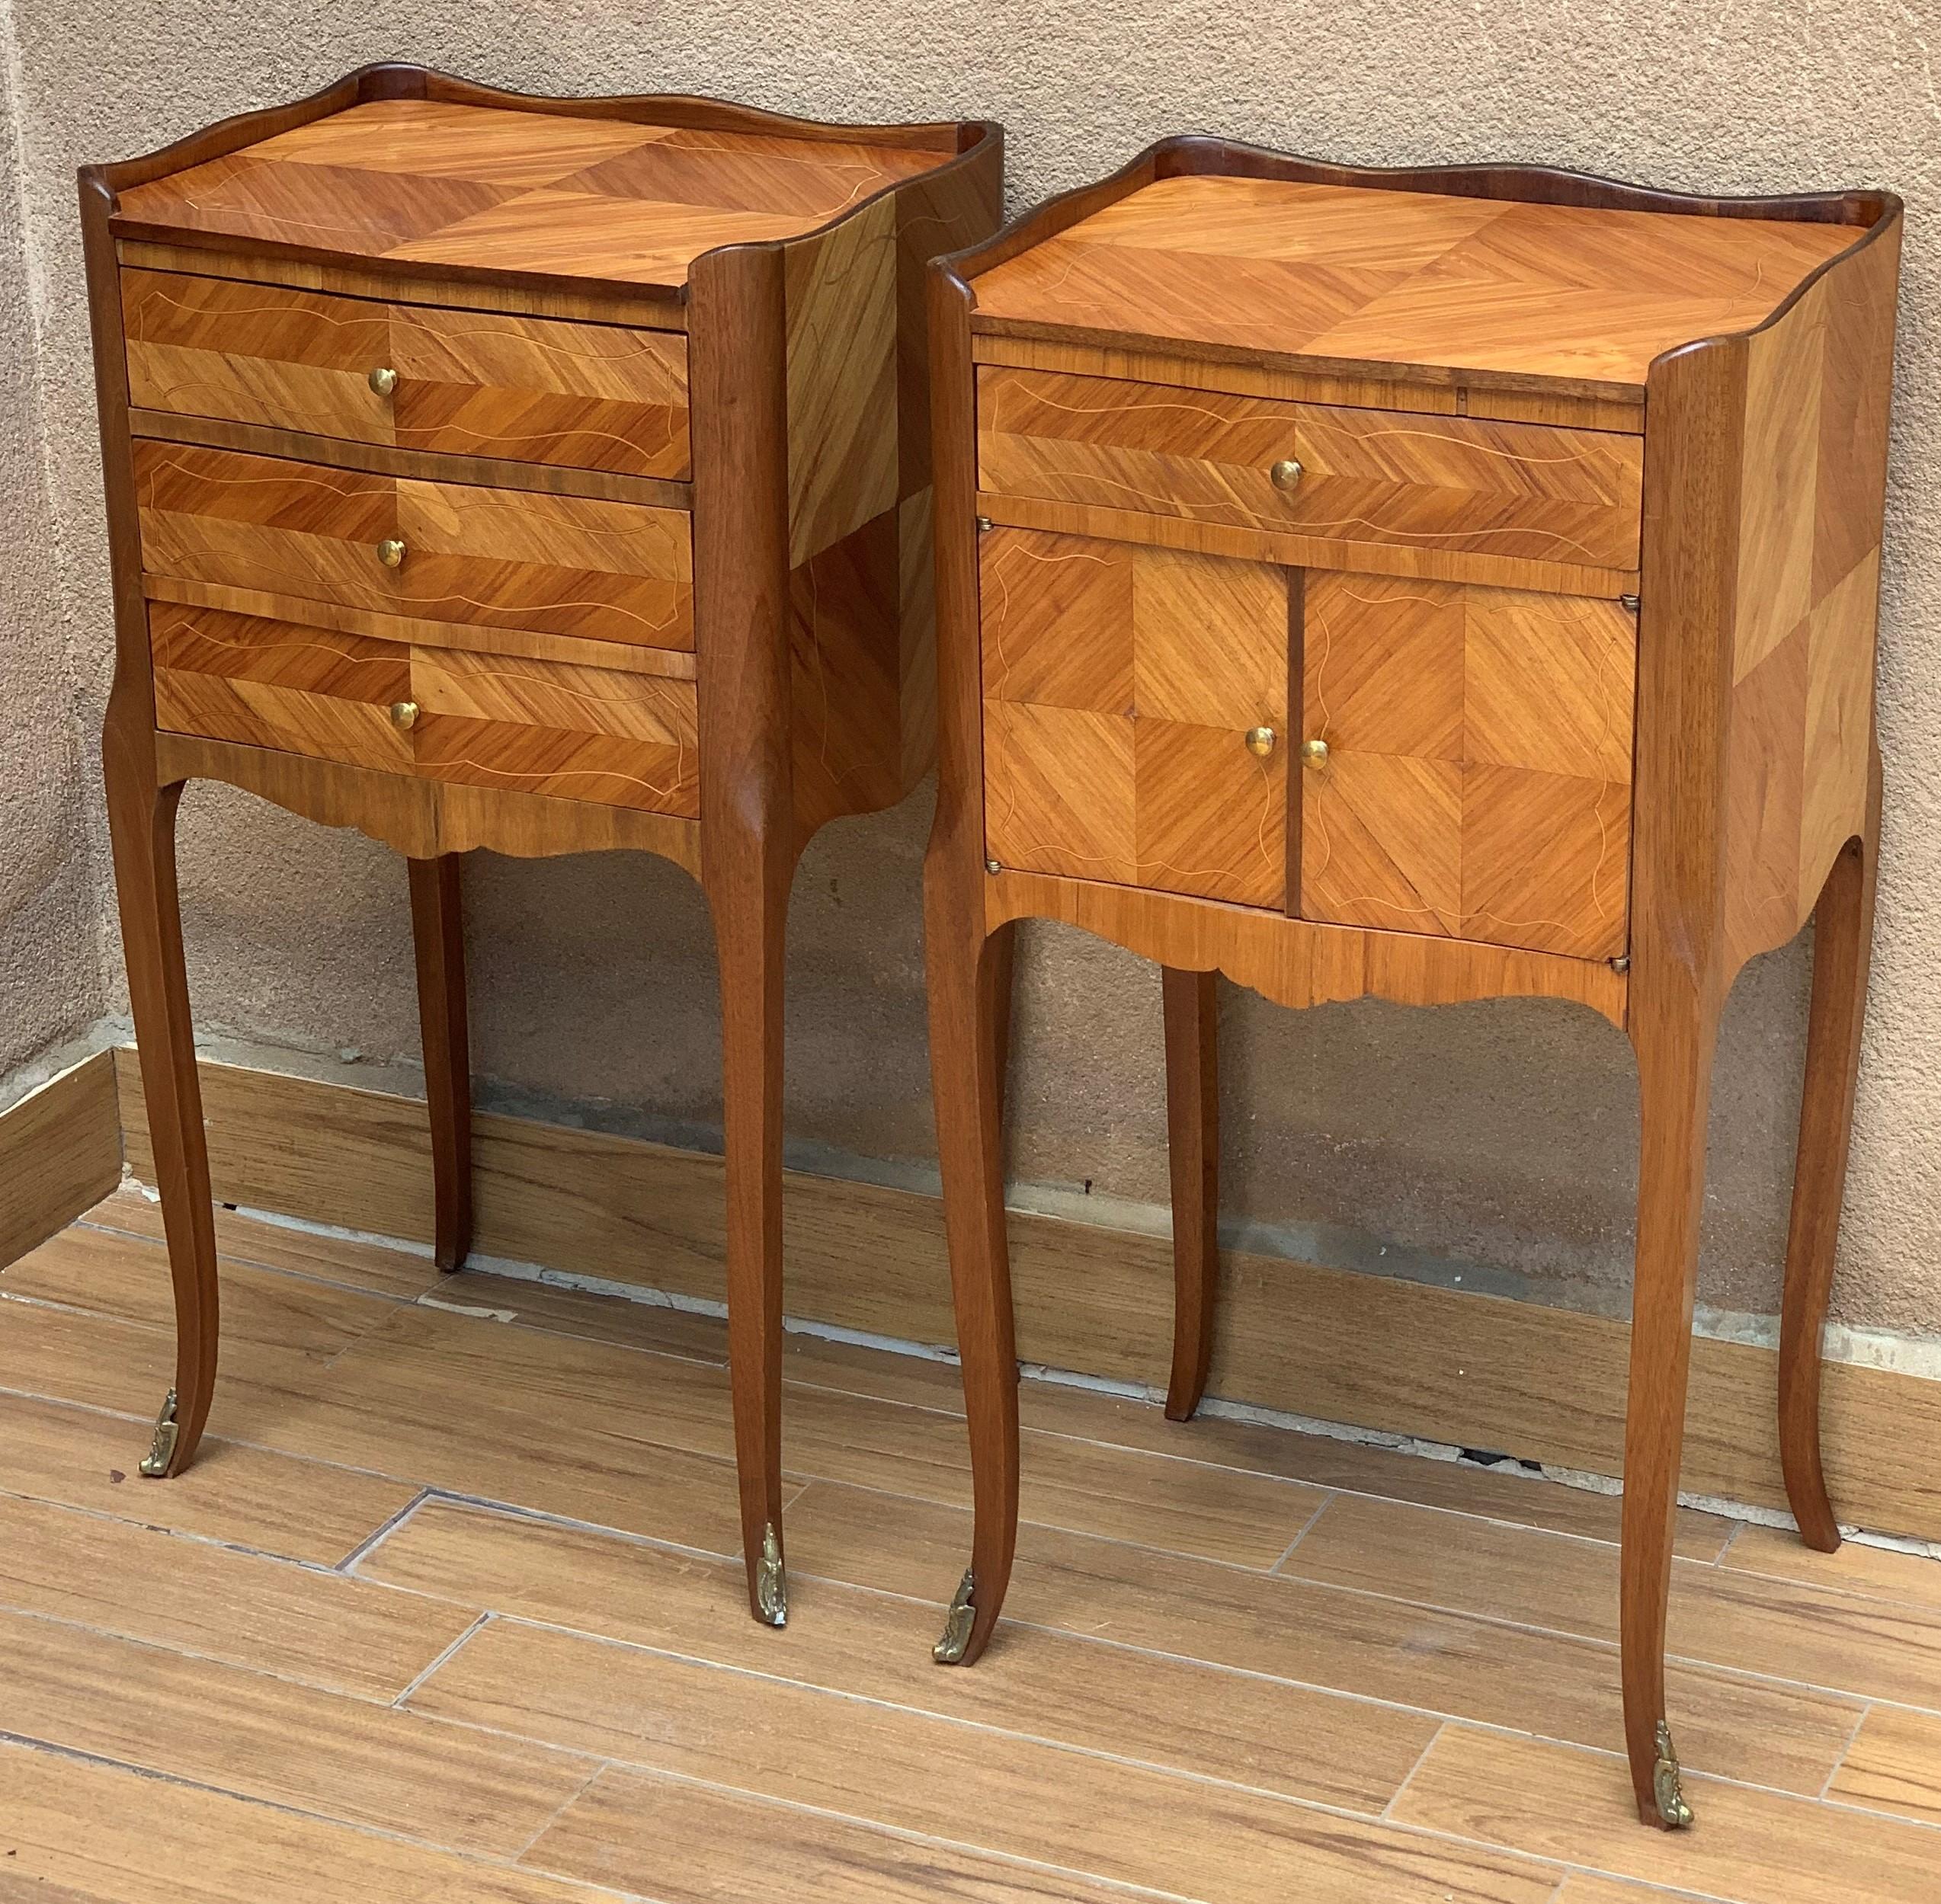 Pair of French Marquetry Walnut Bedside Matching Tables with Drawers and Door (Louis XV.)